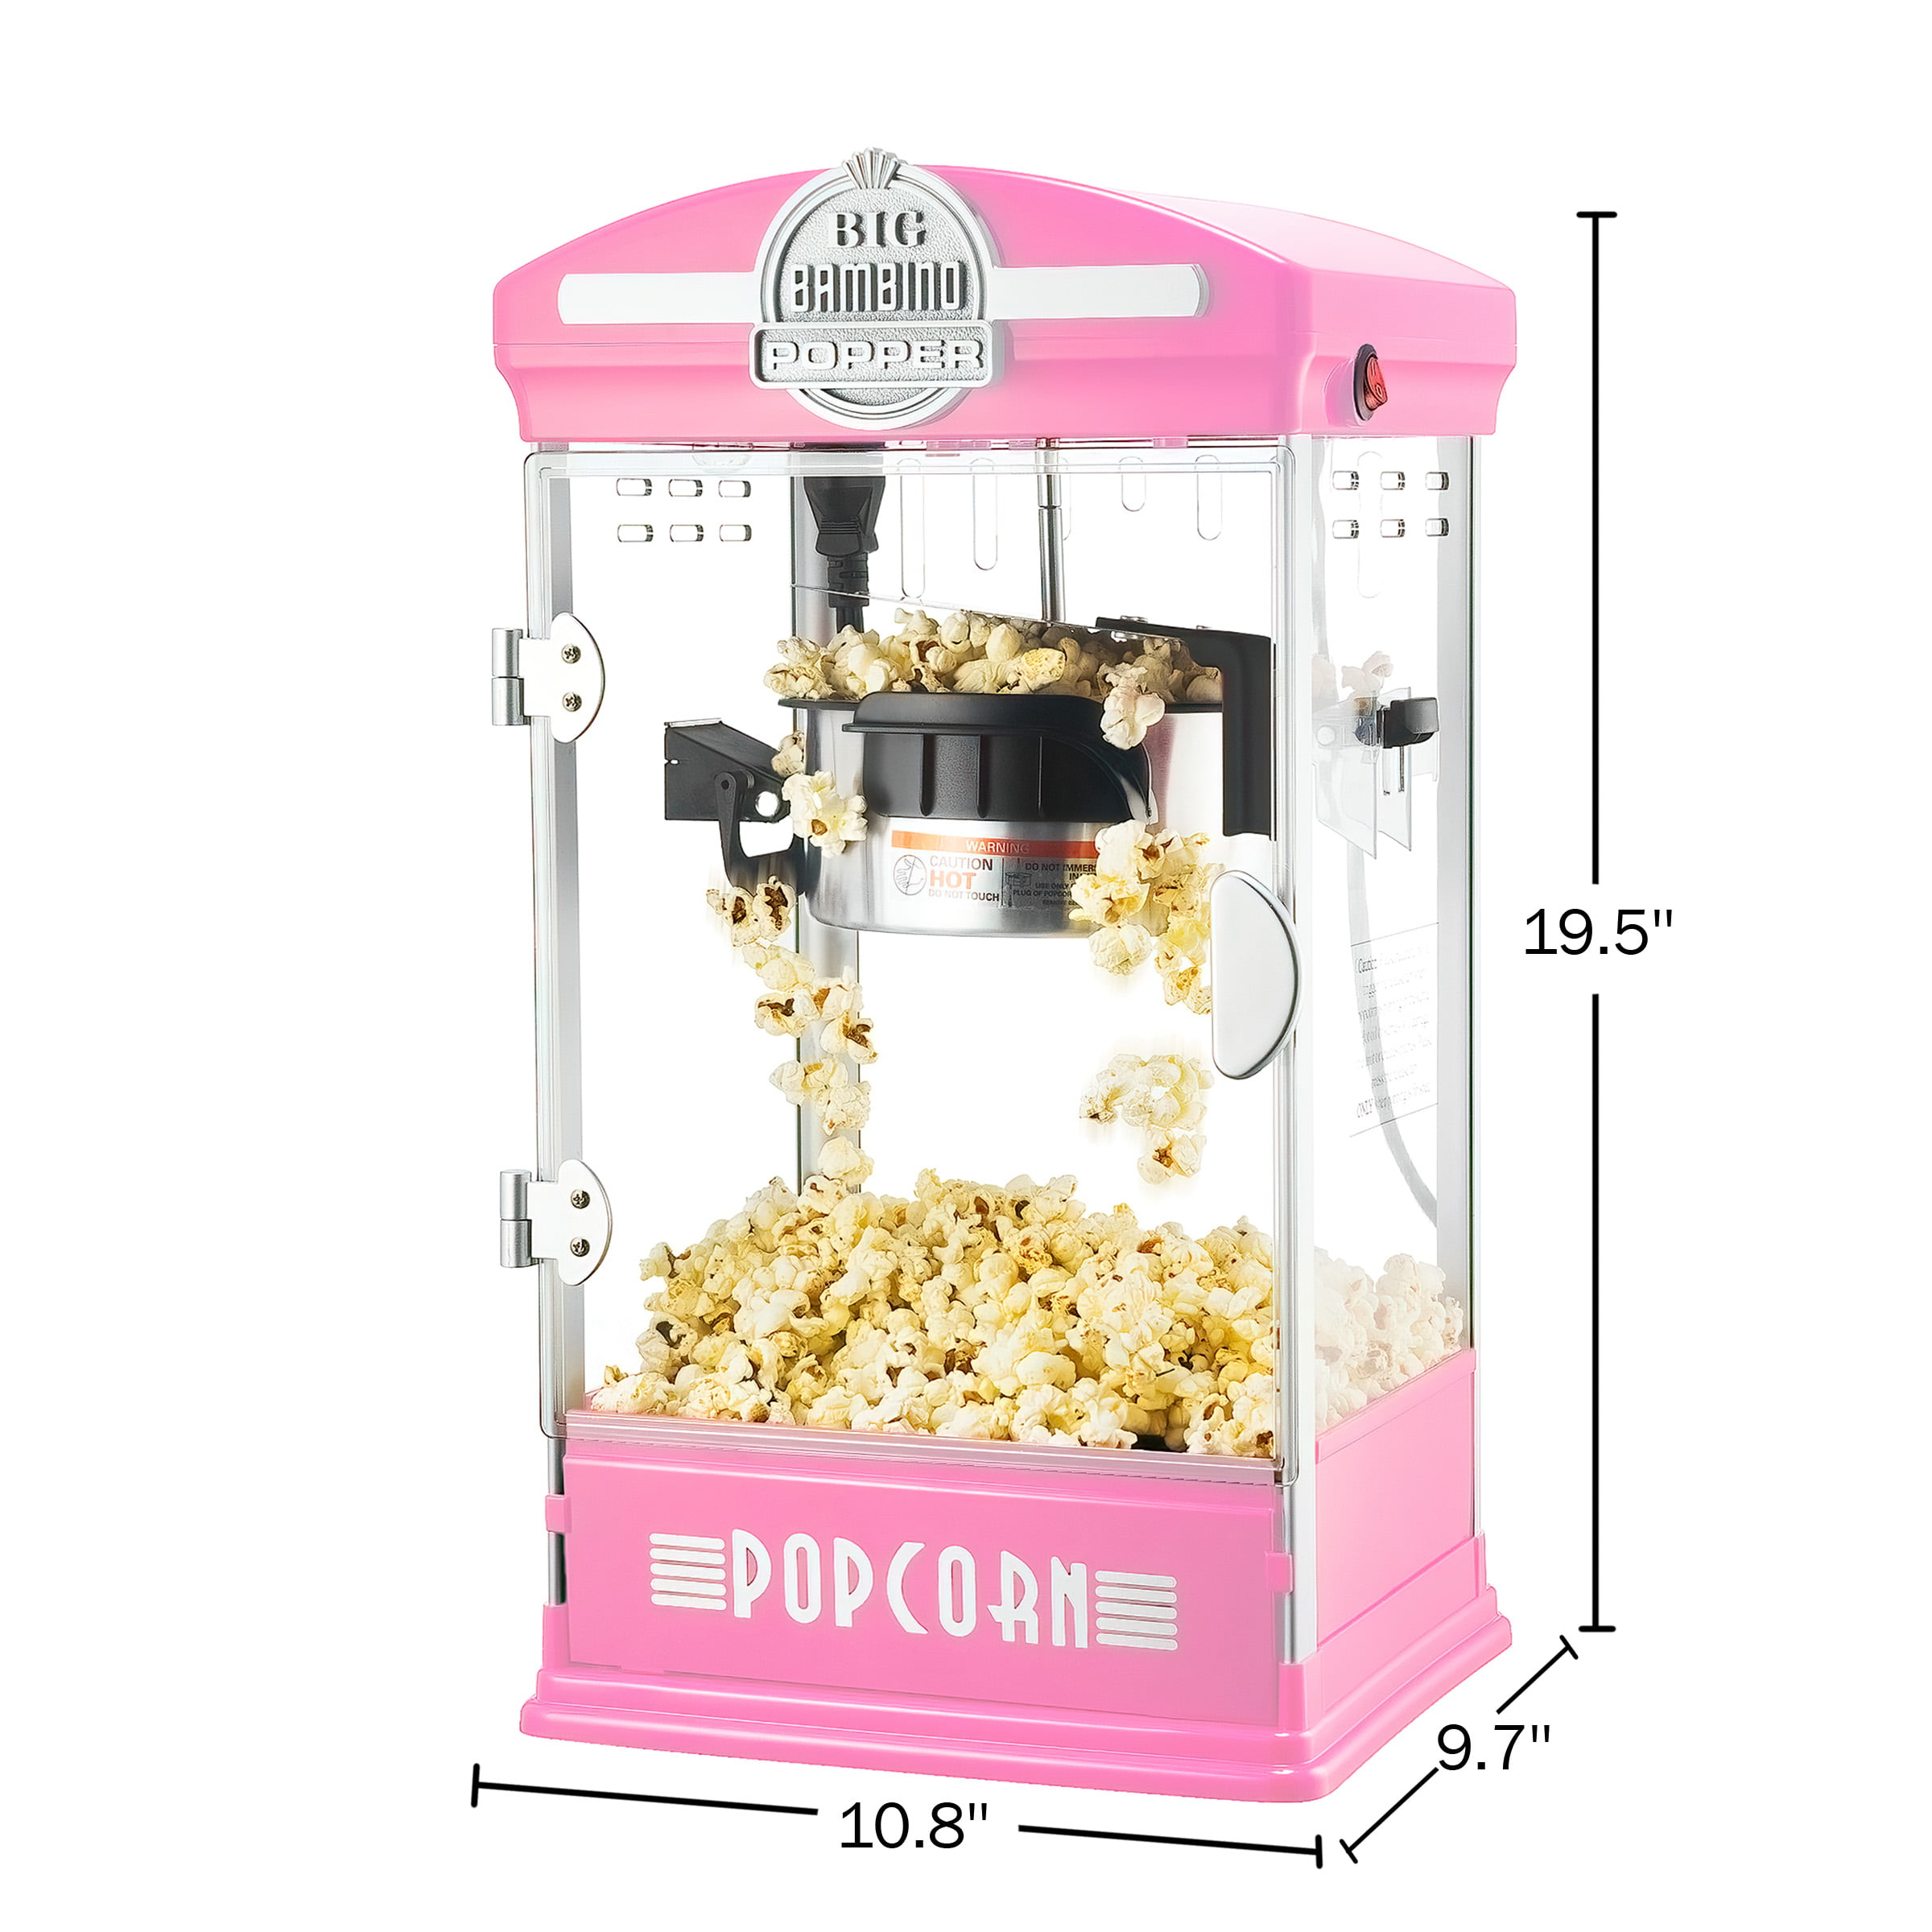 Big Bambino Popcorn Maker Set – 4 Oz Kettle with 24-Pack of Pre